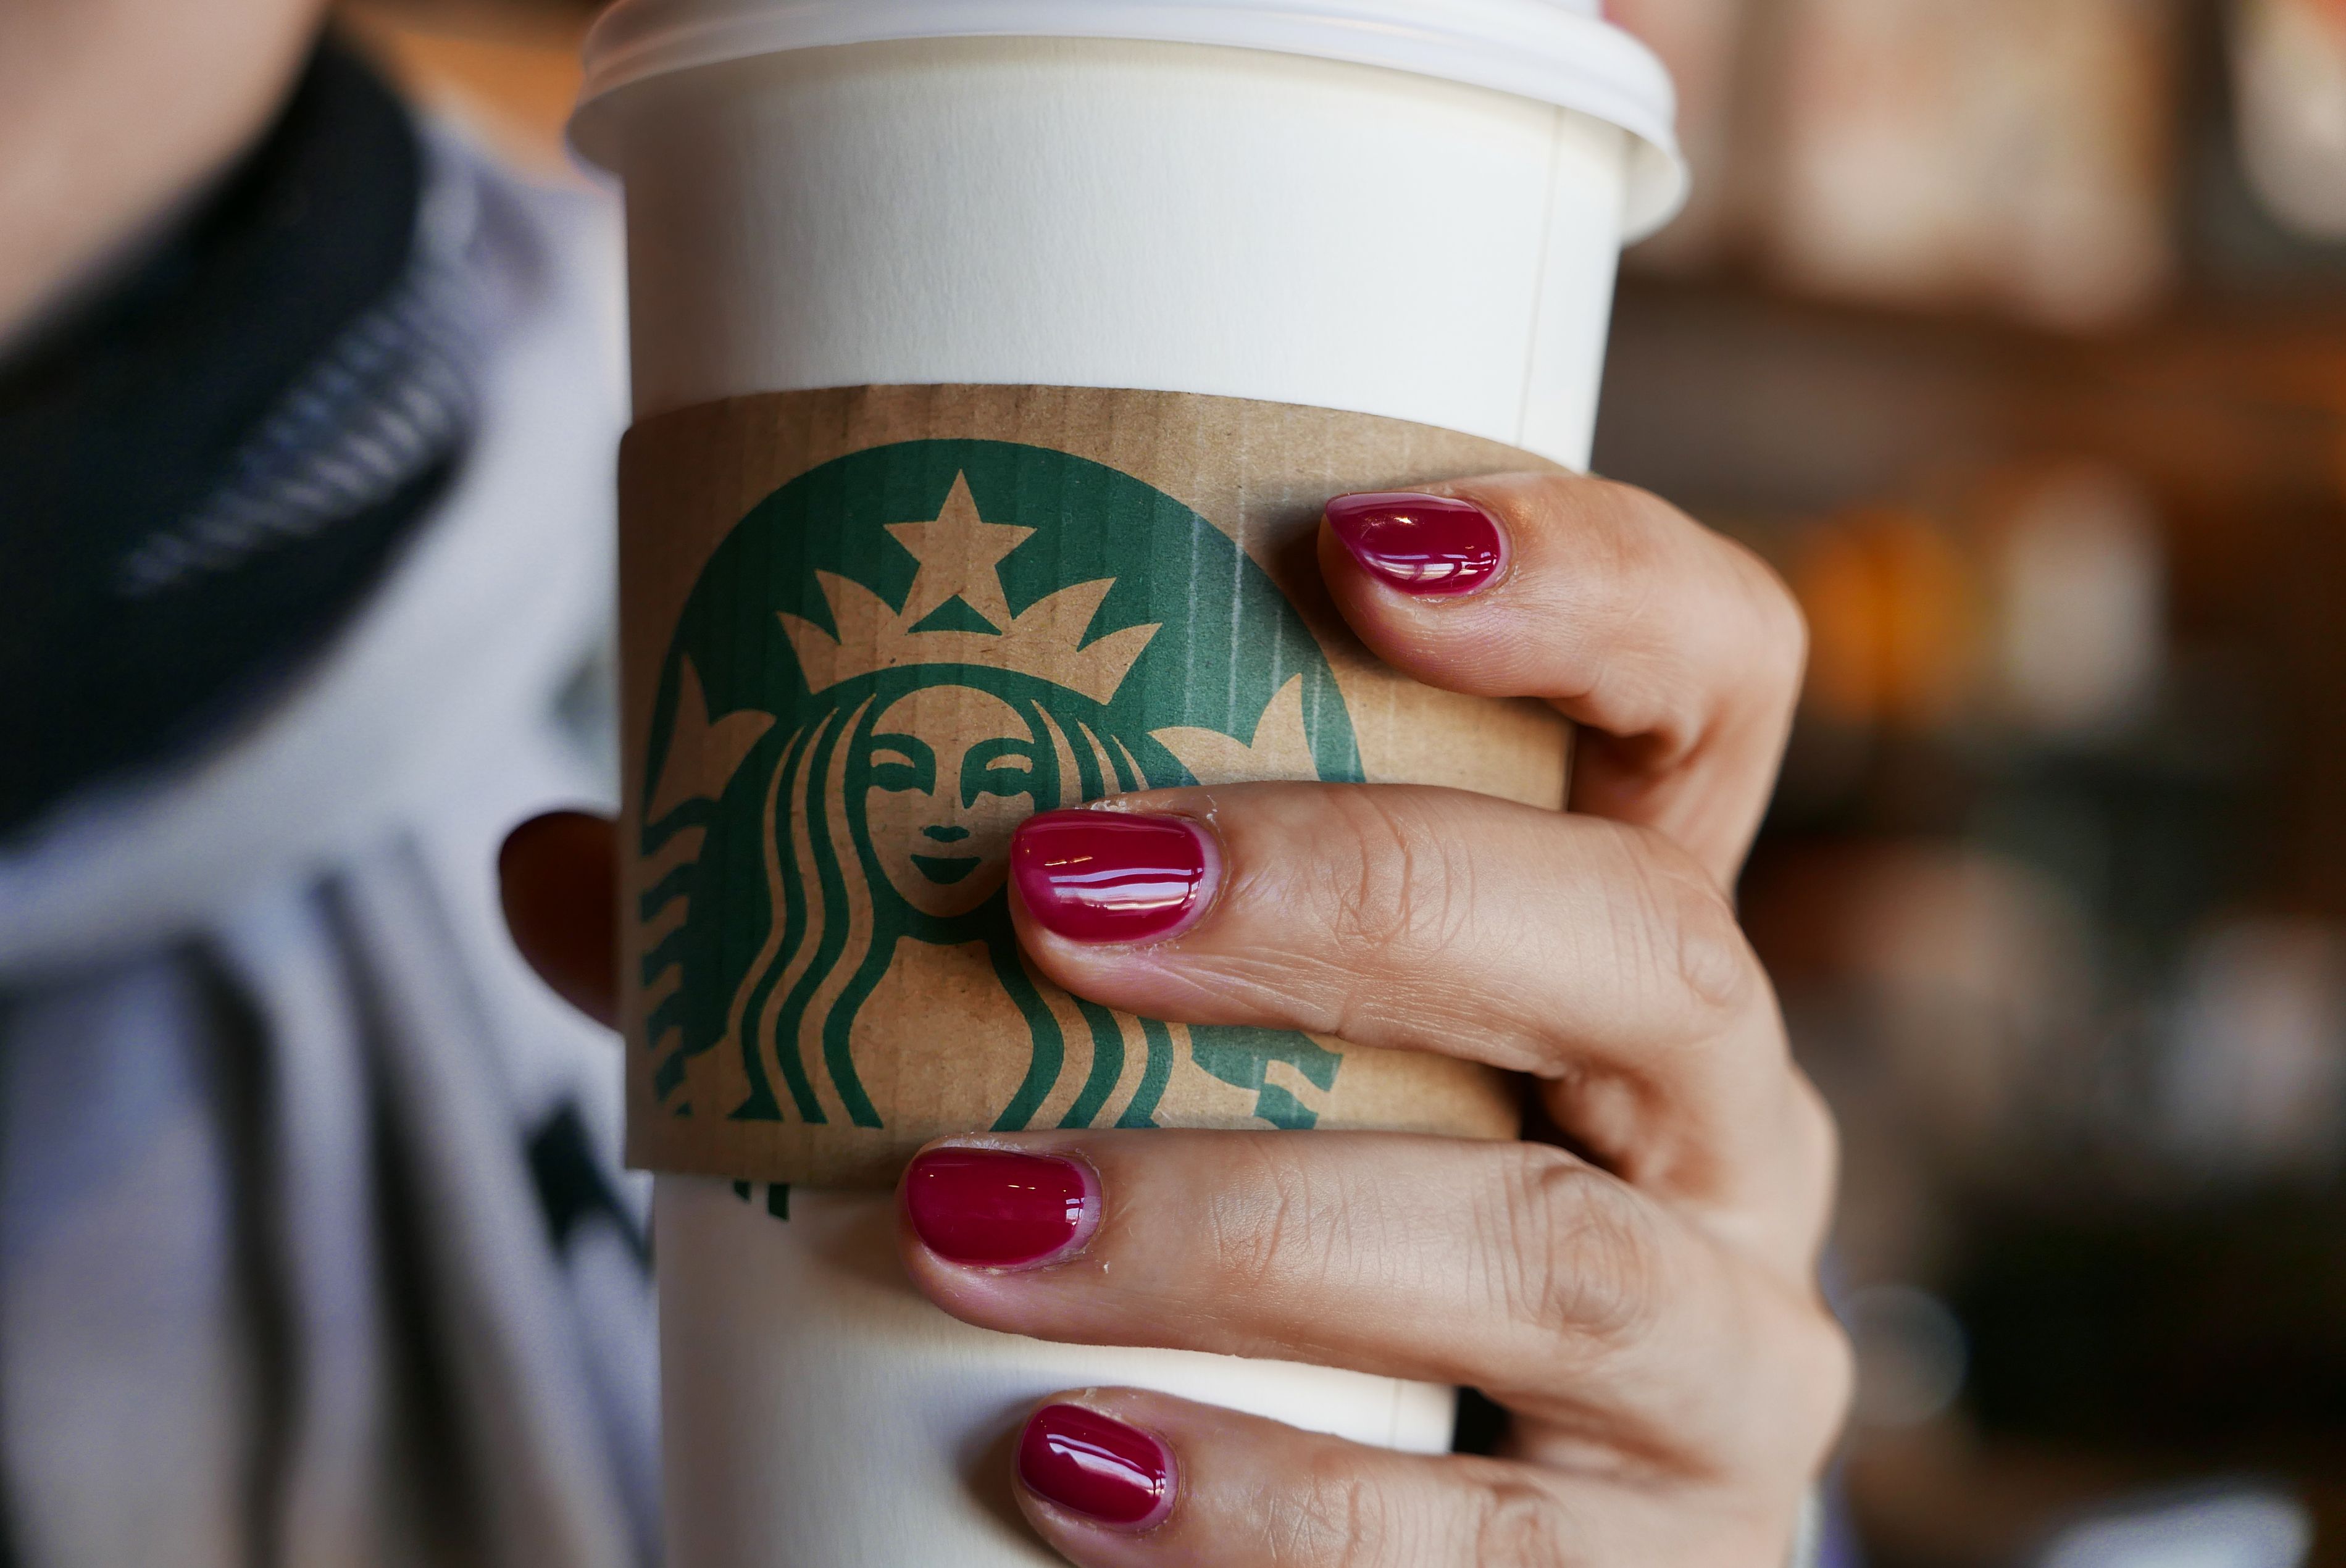 Starbucks' Reusable Tumbler Gives Customers Free Coffee Or Tea Throughout  January